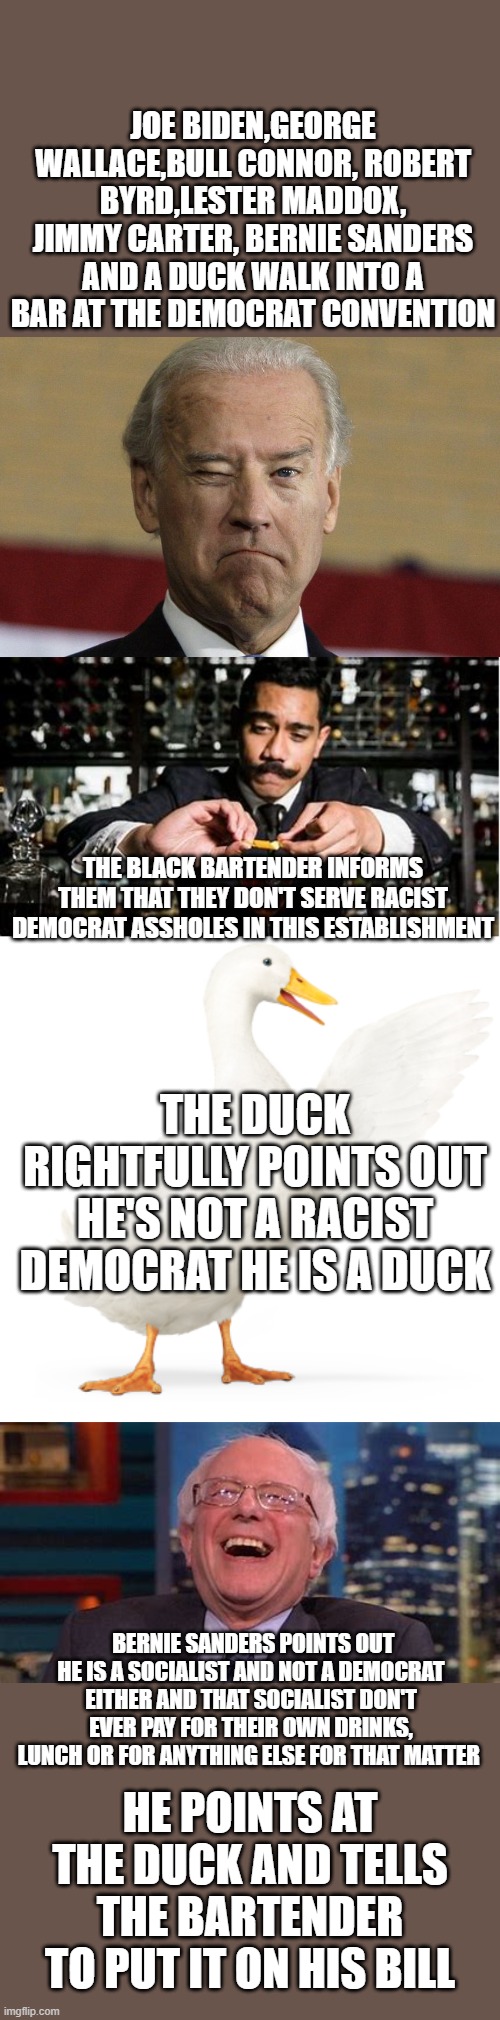 yep | JOE BIDEN,GEORGE WALLACE,BULL CONNOR, ROBERT BYRD,LESTER MADDOX, JIMMY CARTER, BERNIE SANDERS AND A DUCK WALK INTO A BAR AT THE DEMOCRAT CONVENTION; THE BLACK BARTENDER INFORMS THEM THAT THEY DON'T SERVE RACIST DEMOCRAT ASSHOLES IN THIS ESTABLISHMENT; THE DUCK RIGHTFULLY POINTS OUT HE'S NOT A RACIST DEMOCRAT HE IS A DUCK; BERNIE SANDERS POINTS OUT HE IS A SOCIALIST AND NOT A DEMOCRAT EITHER AND THAT SOCIALIST DON'T EVER PAY FOR THEIR OWN DRINKS, LUNCH OR FOR ANYTHING ELSE FOR THAT MATTER; HE POINTS AT THE DUCK AND TELLS THE BARTENDER TO PUT IT ON HIS BILL | image tagged in joe biden,democrats,bernie sanders | made w/ Imgflip meme maker